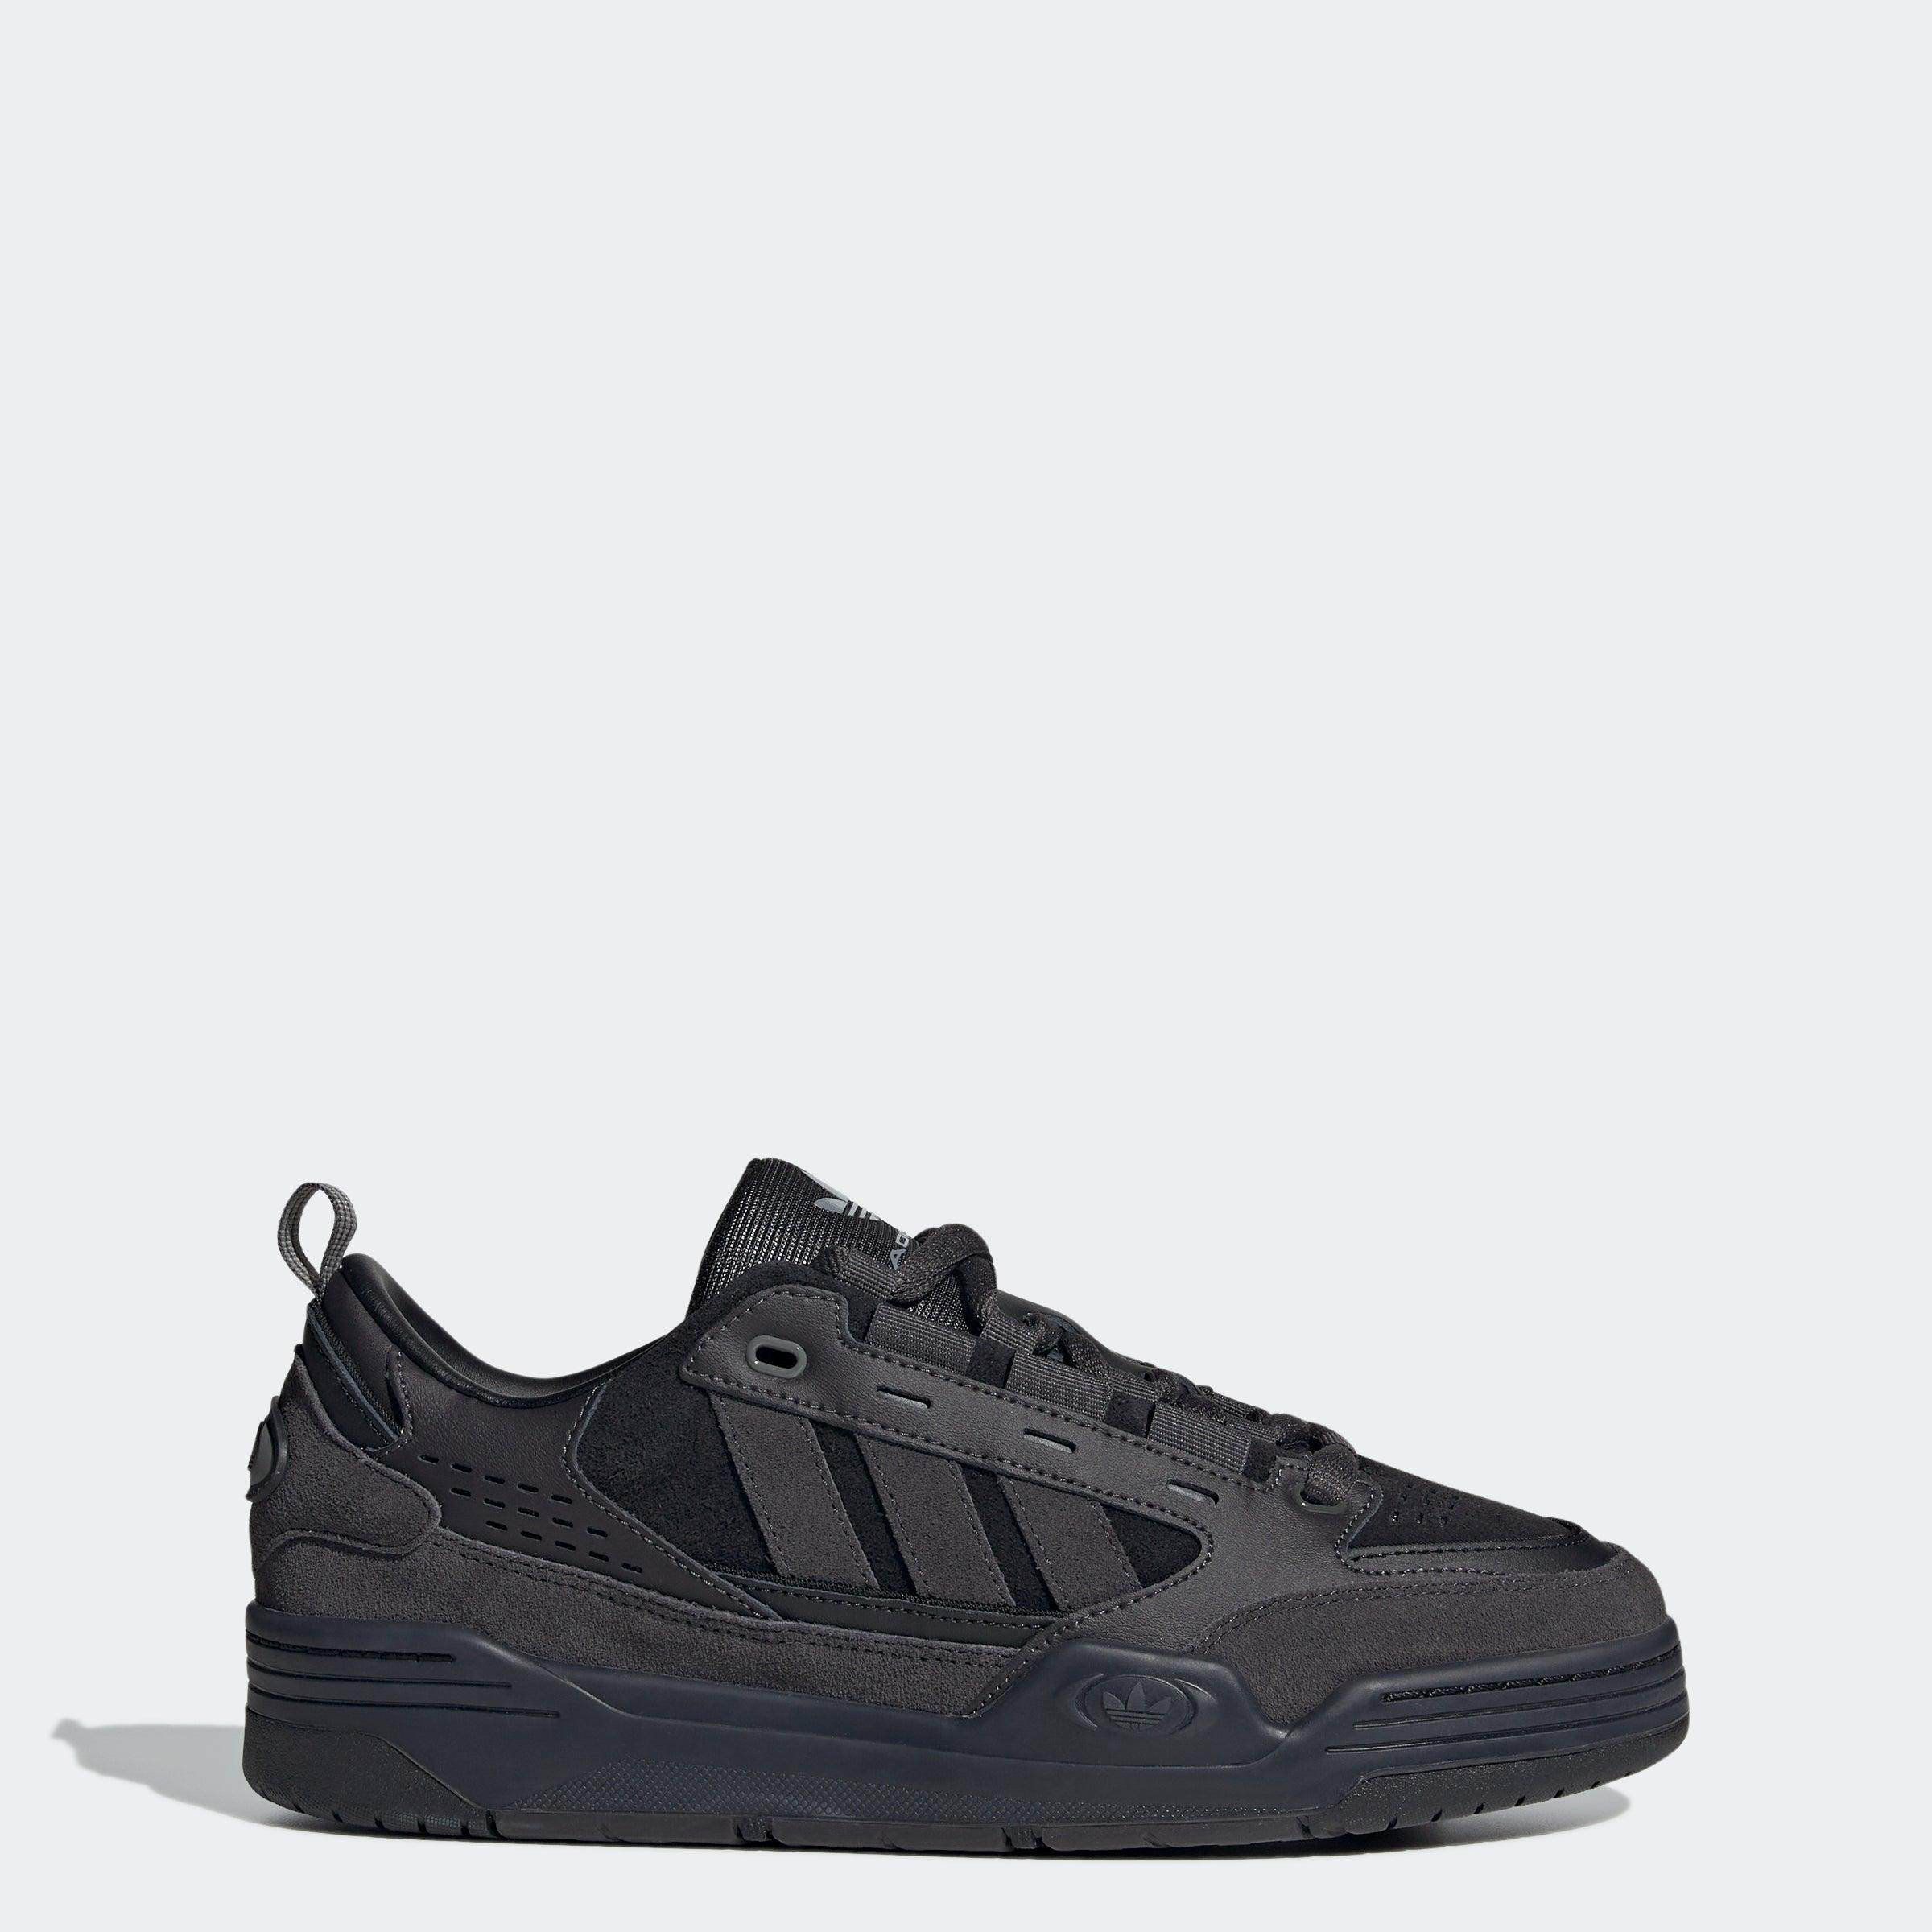 adidas Adi2000 Shoes in Black Lyst Men for 